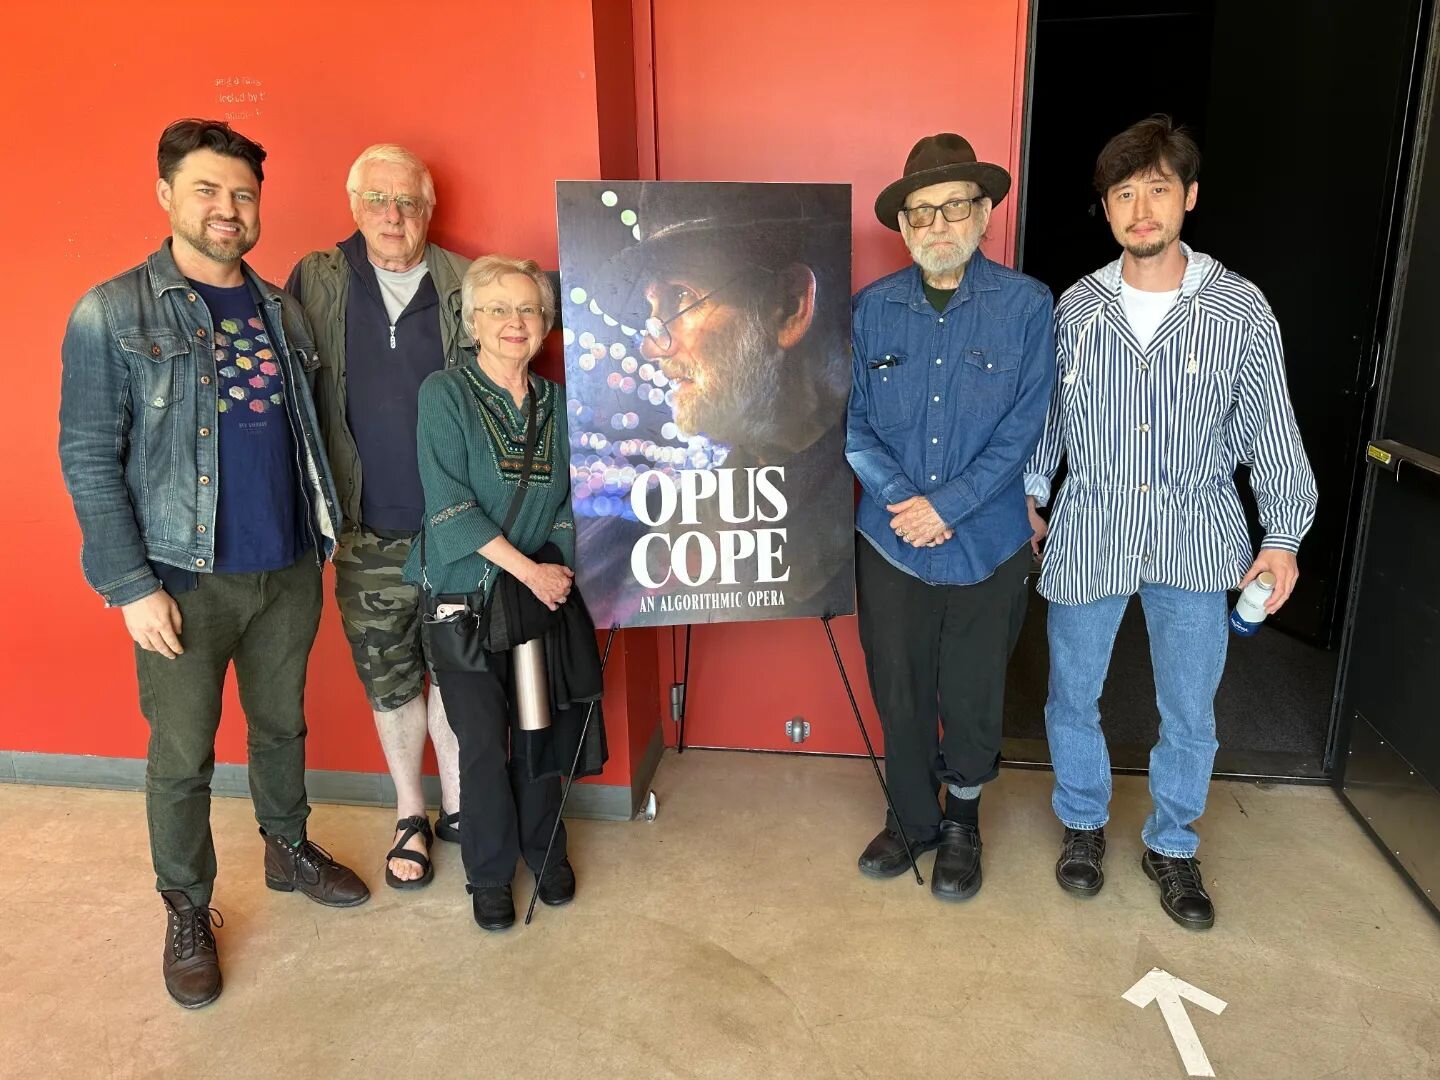 Composer David Cope makes a surprise appearance at UCSC for a colloquium screening of our film moderated by music professor Matthew Schumaker. Thanks to all students, faculty, staff, and members of the public who were able to join and celebrate a lif